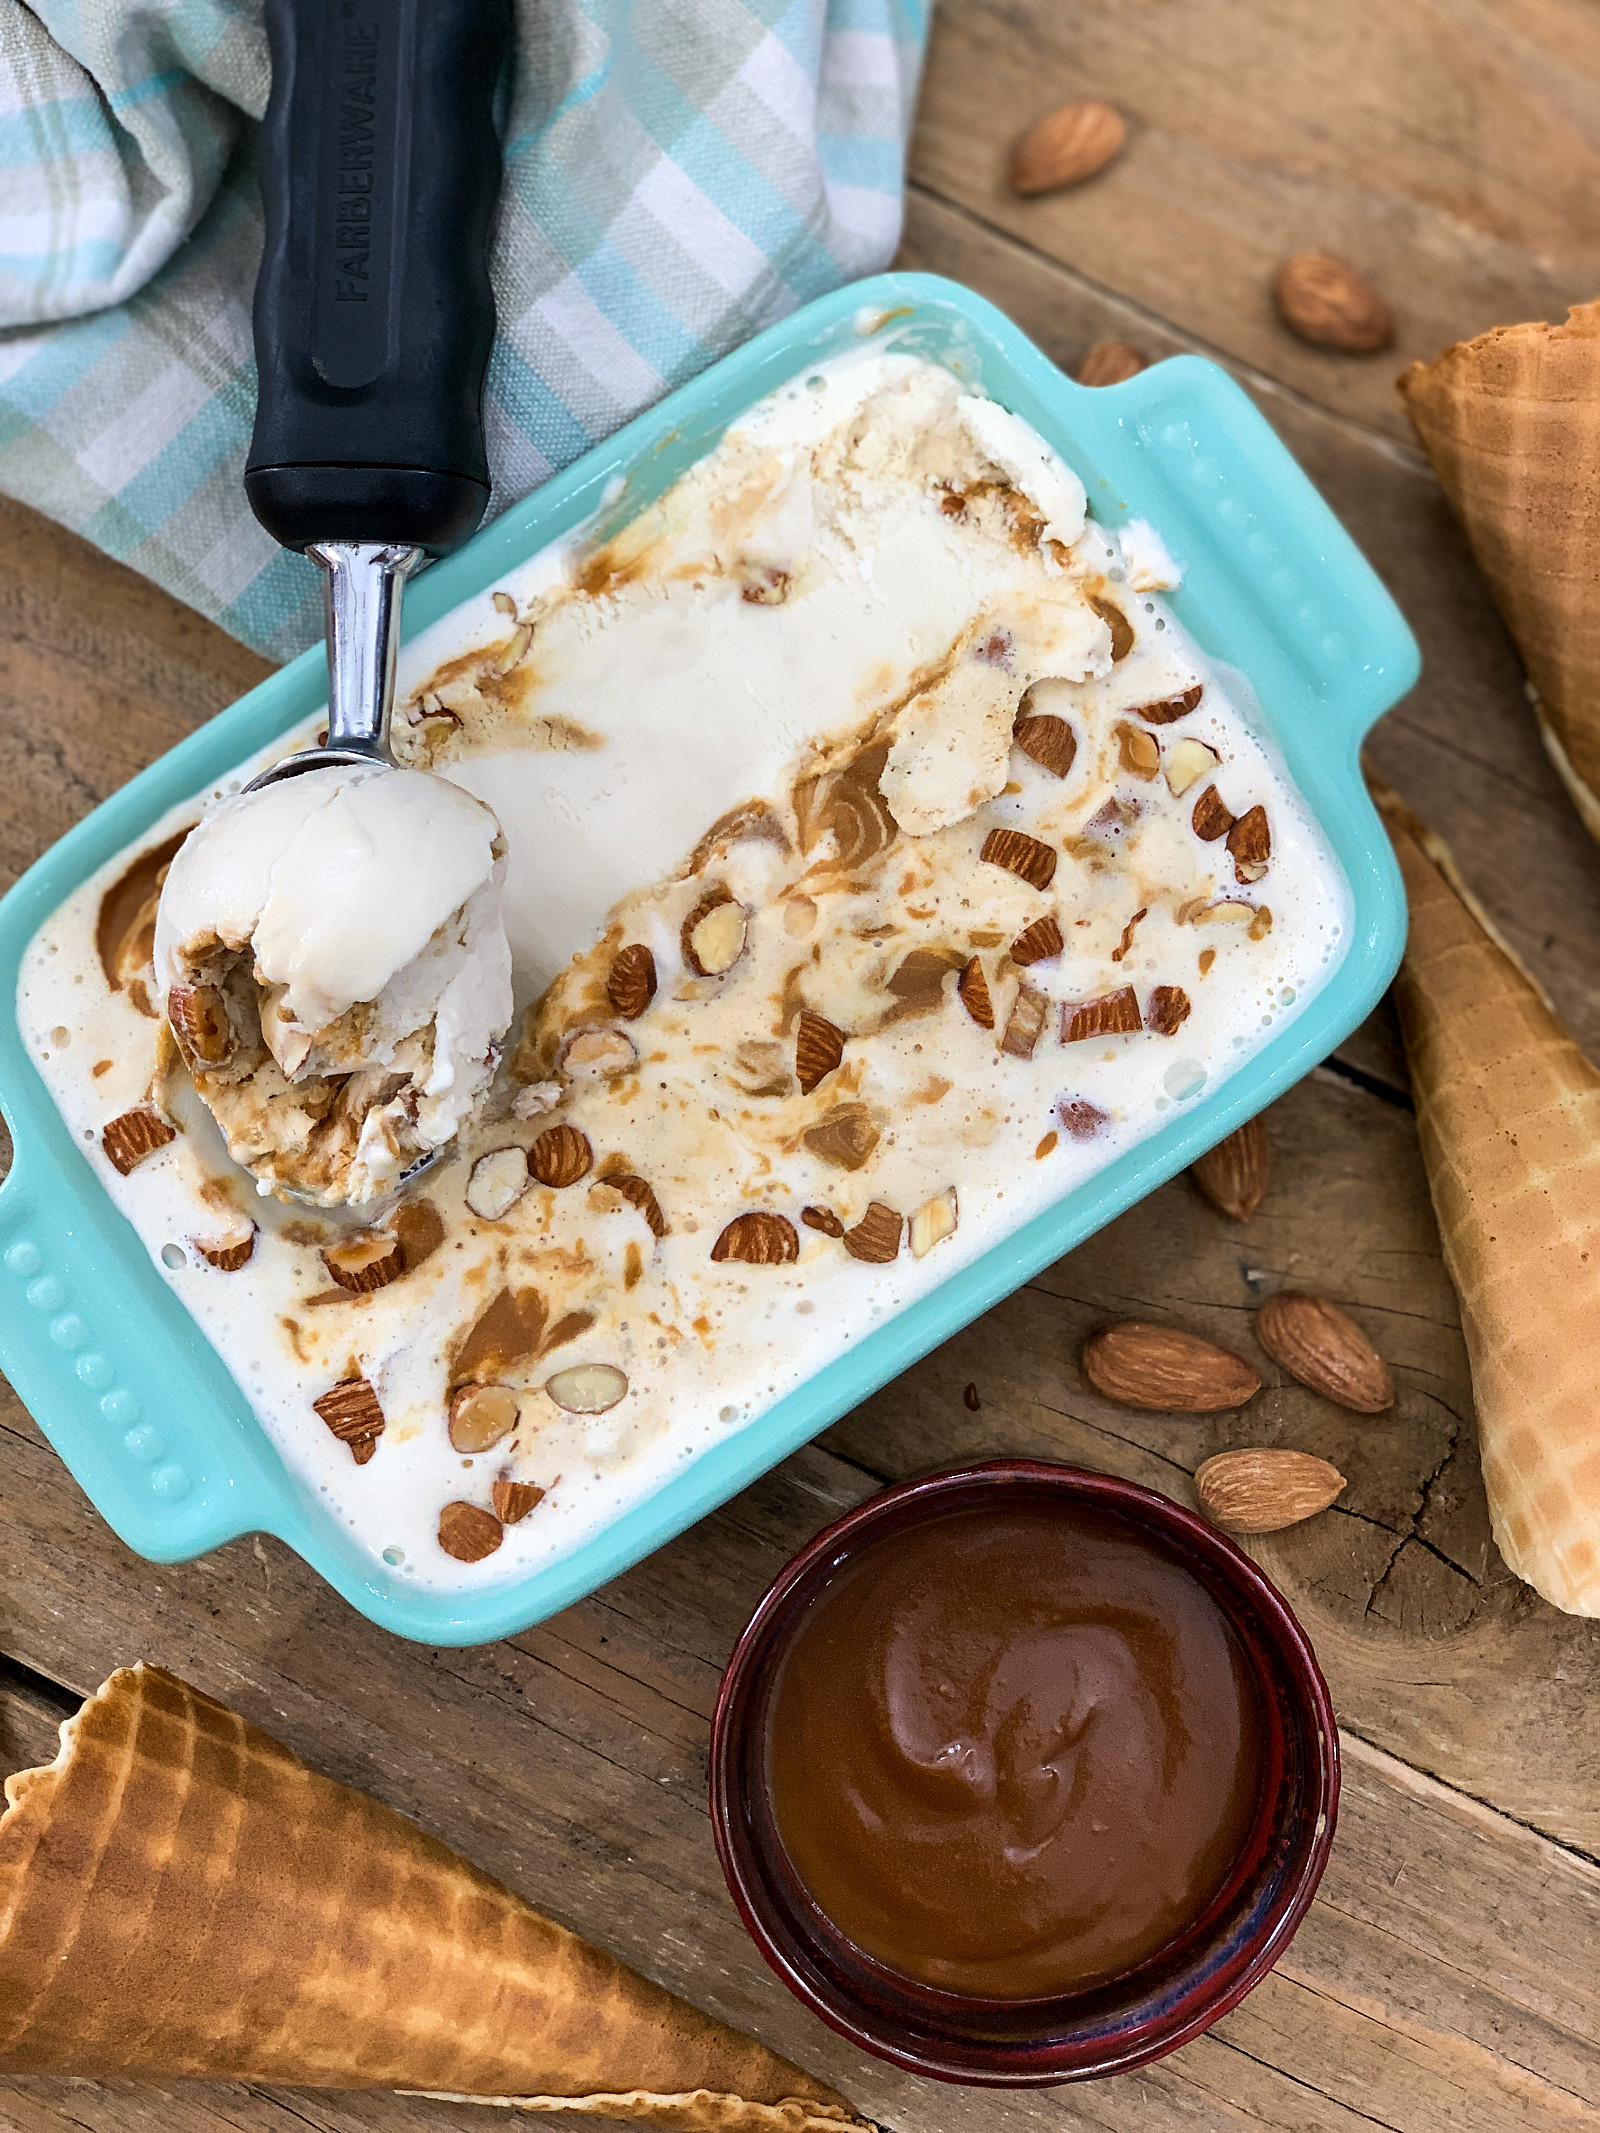 Salted Caramel Ice Cream Recipe With Salted Roasted Almonds